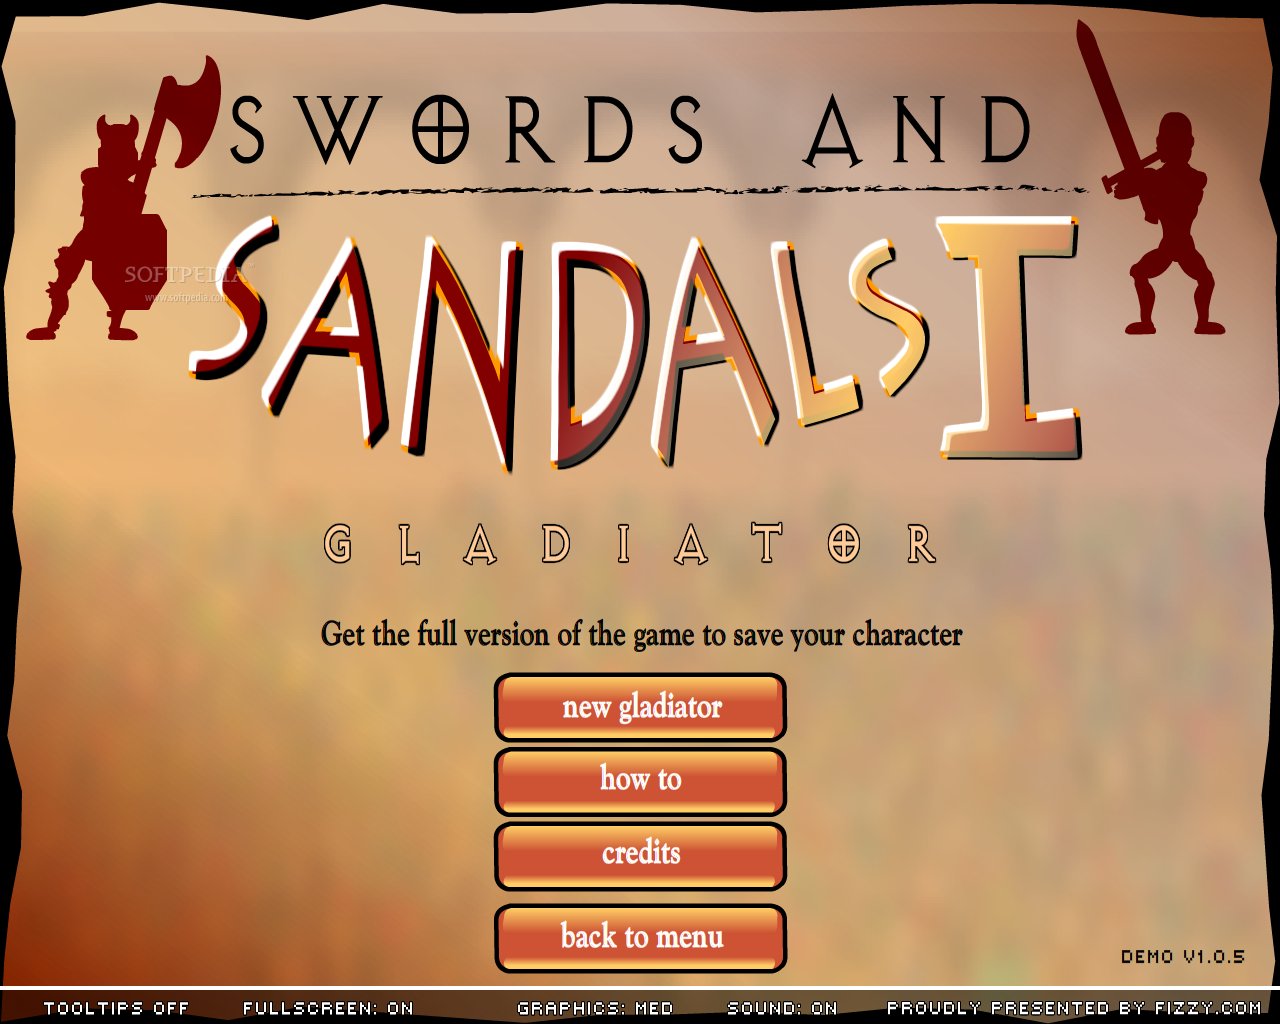 swords and sandals 3 glitches